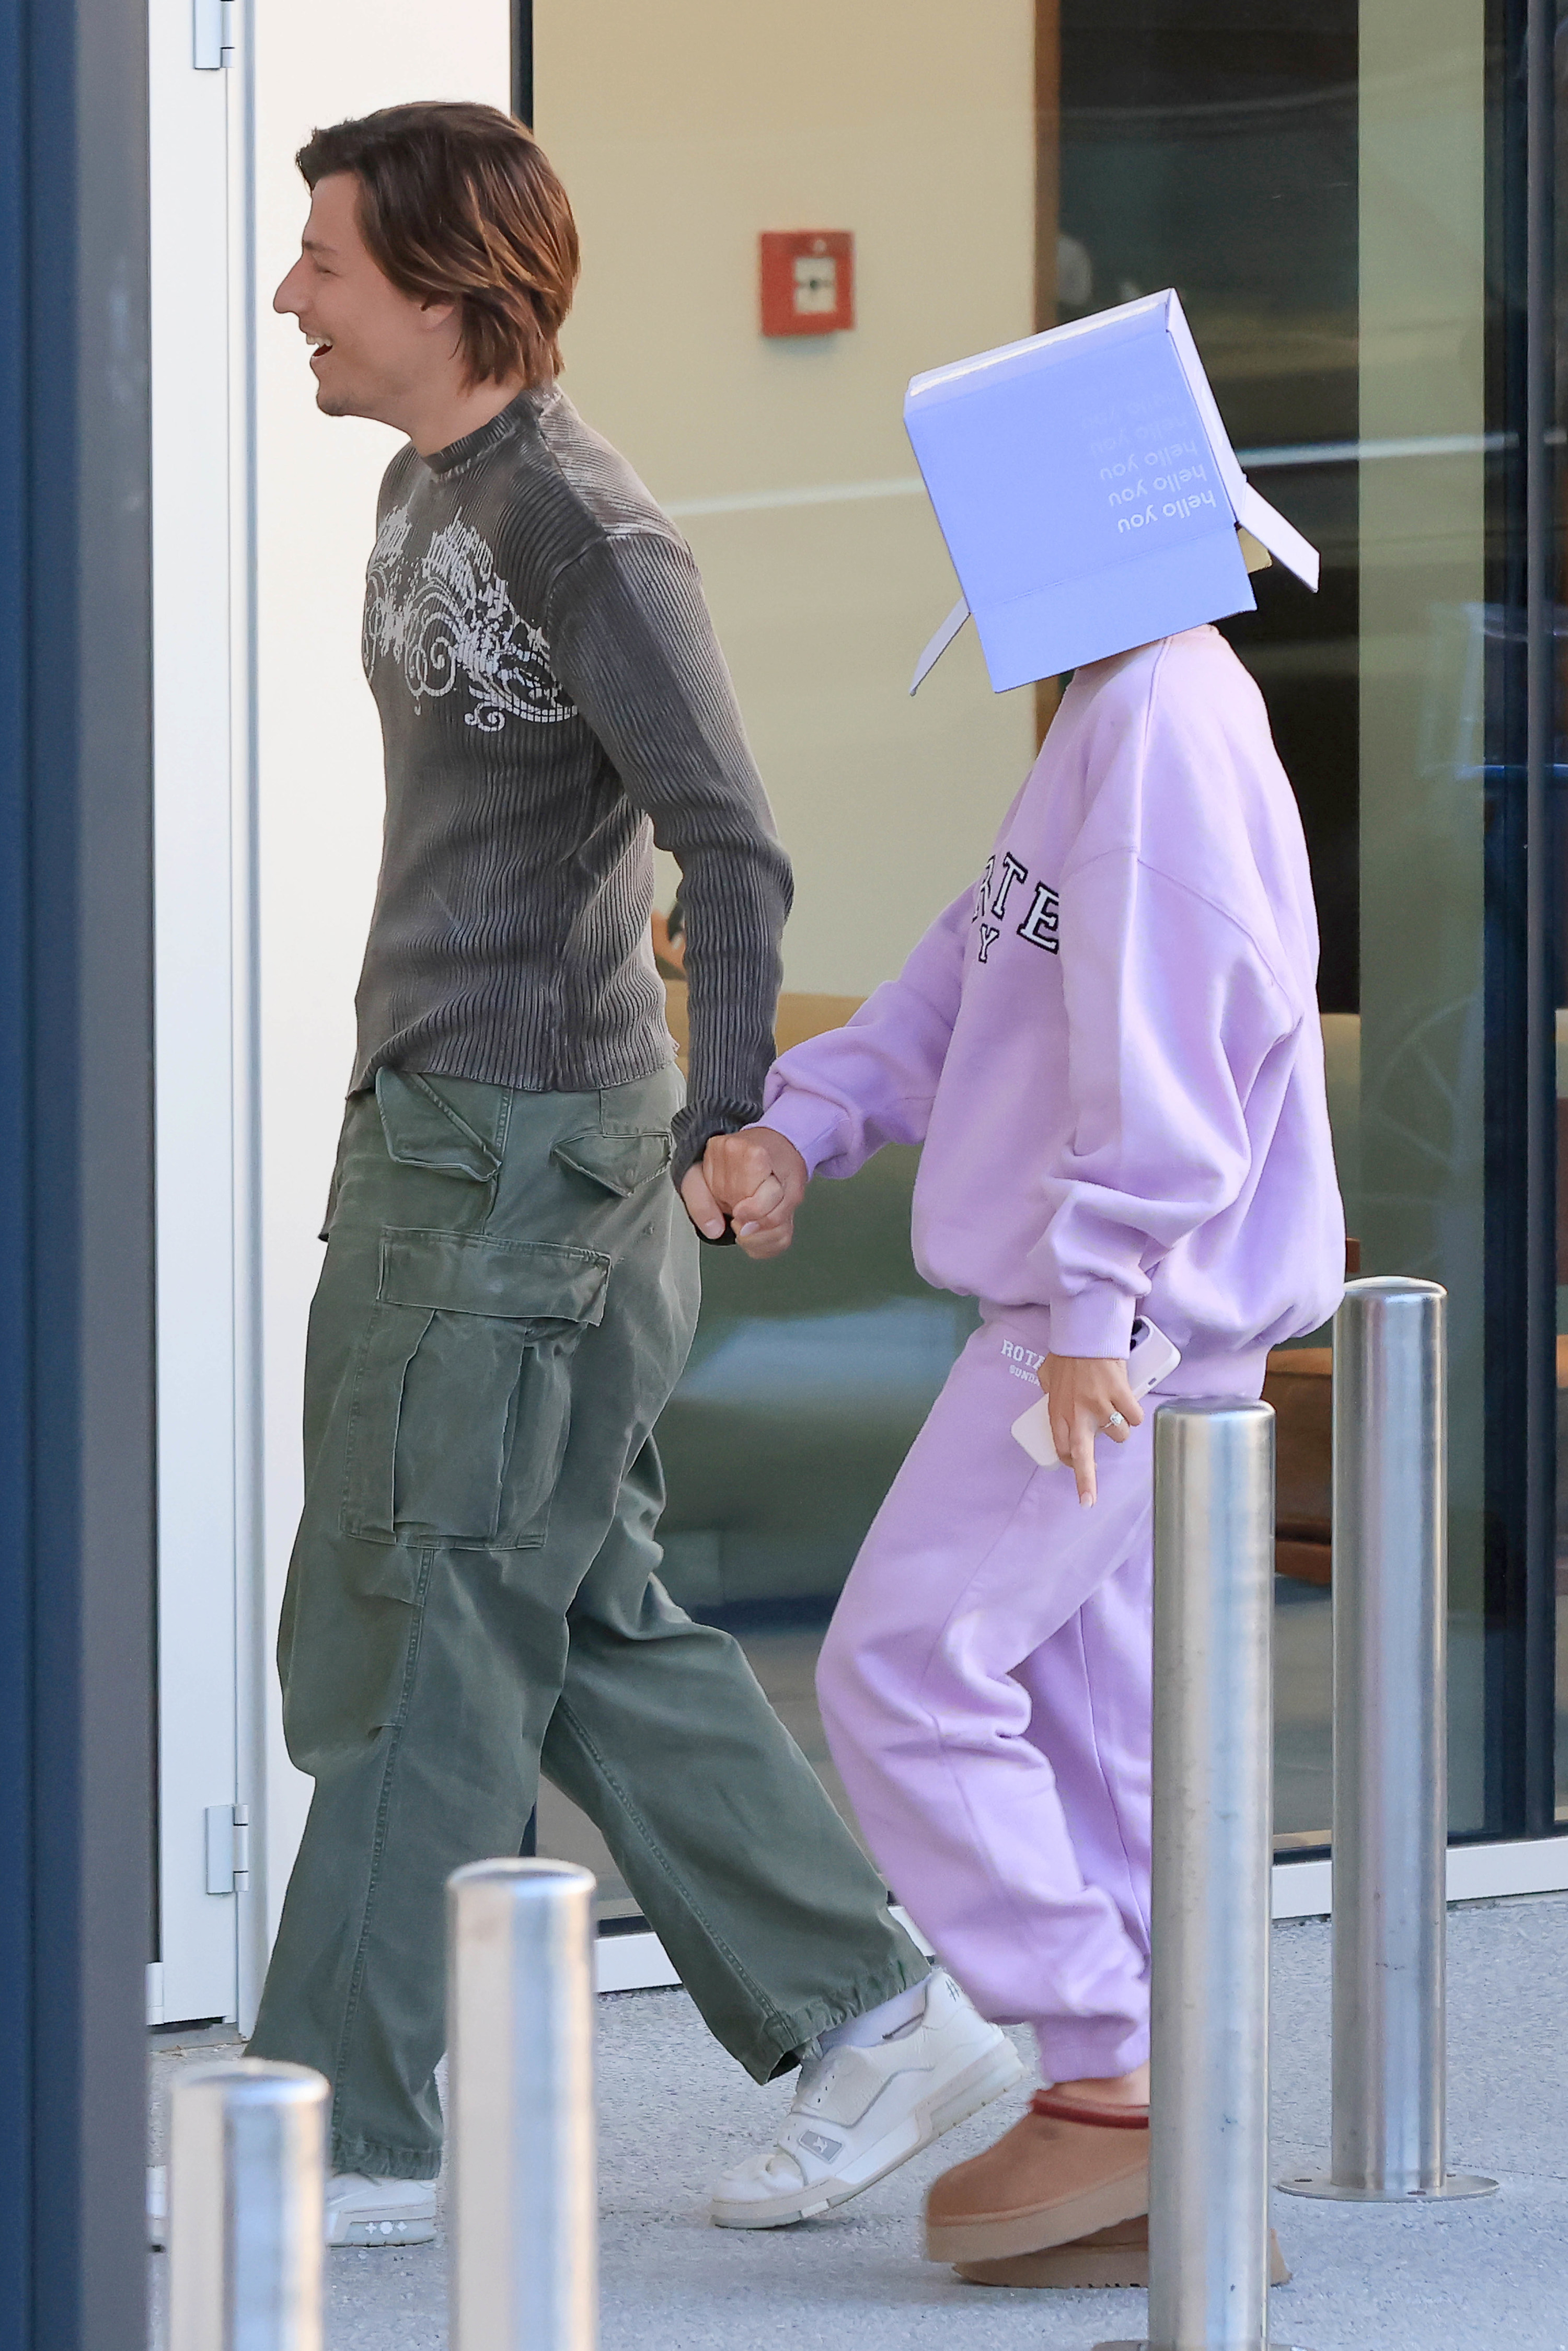 Jake Bongiovi and Millie Bobby Brown walking down the street, a box covering her head